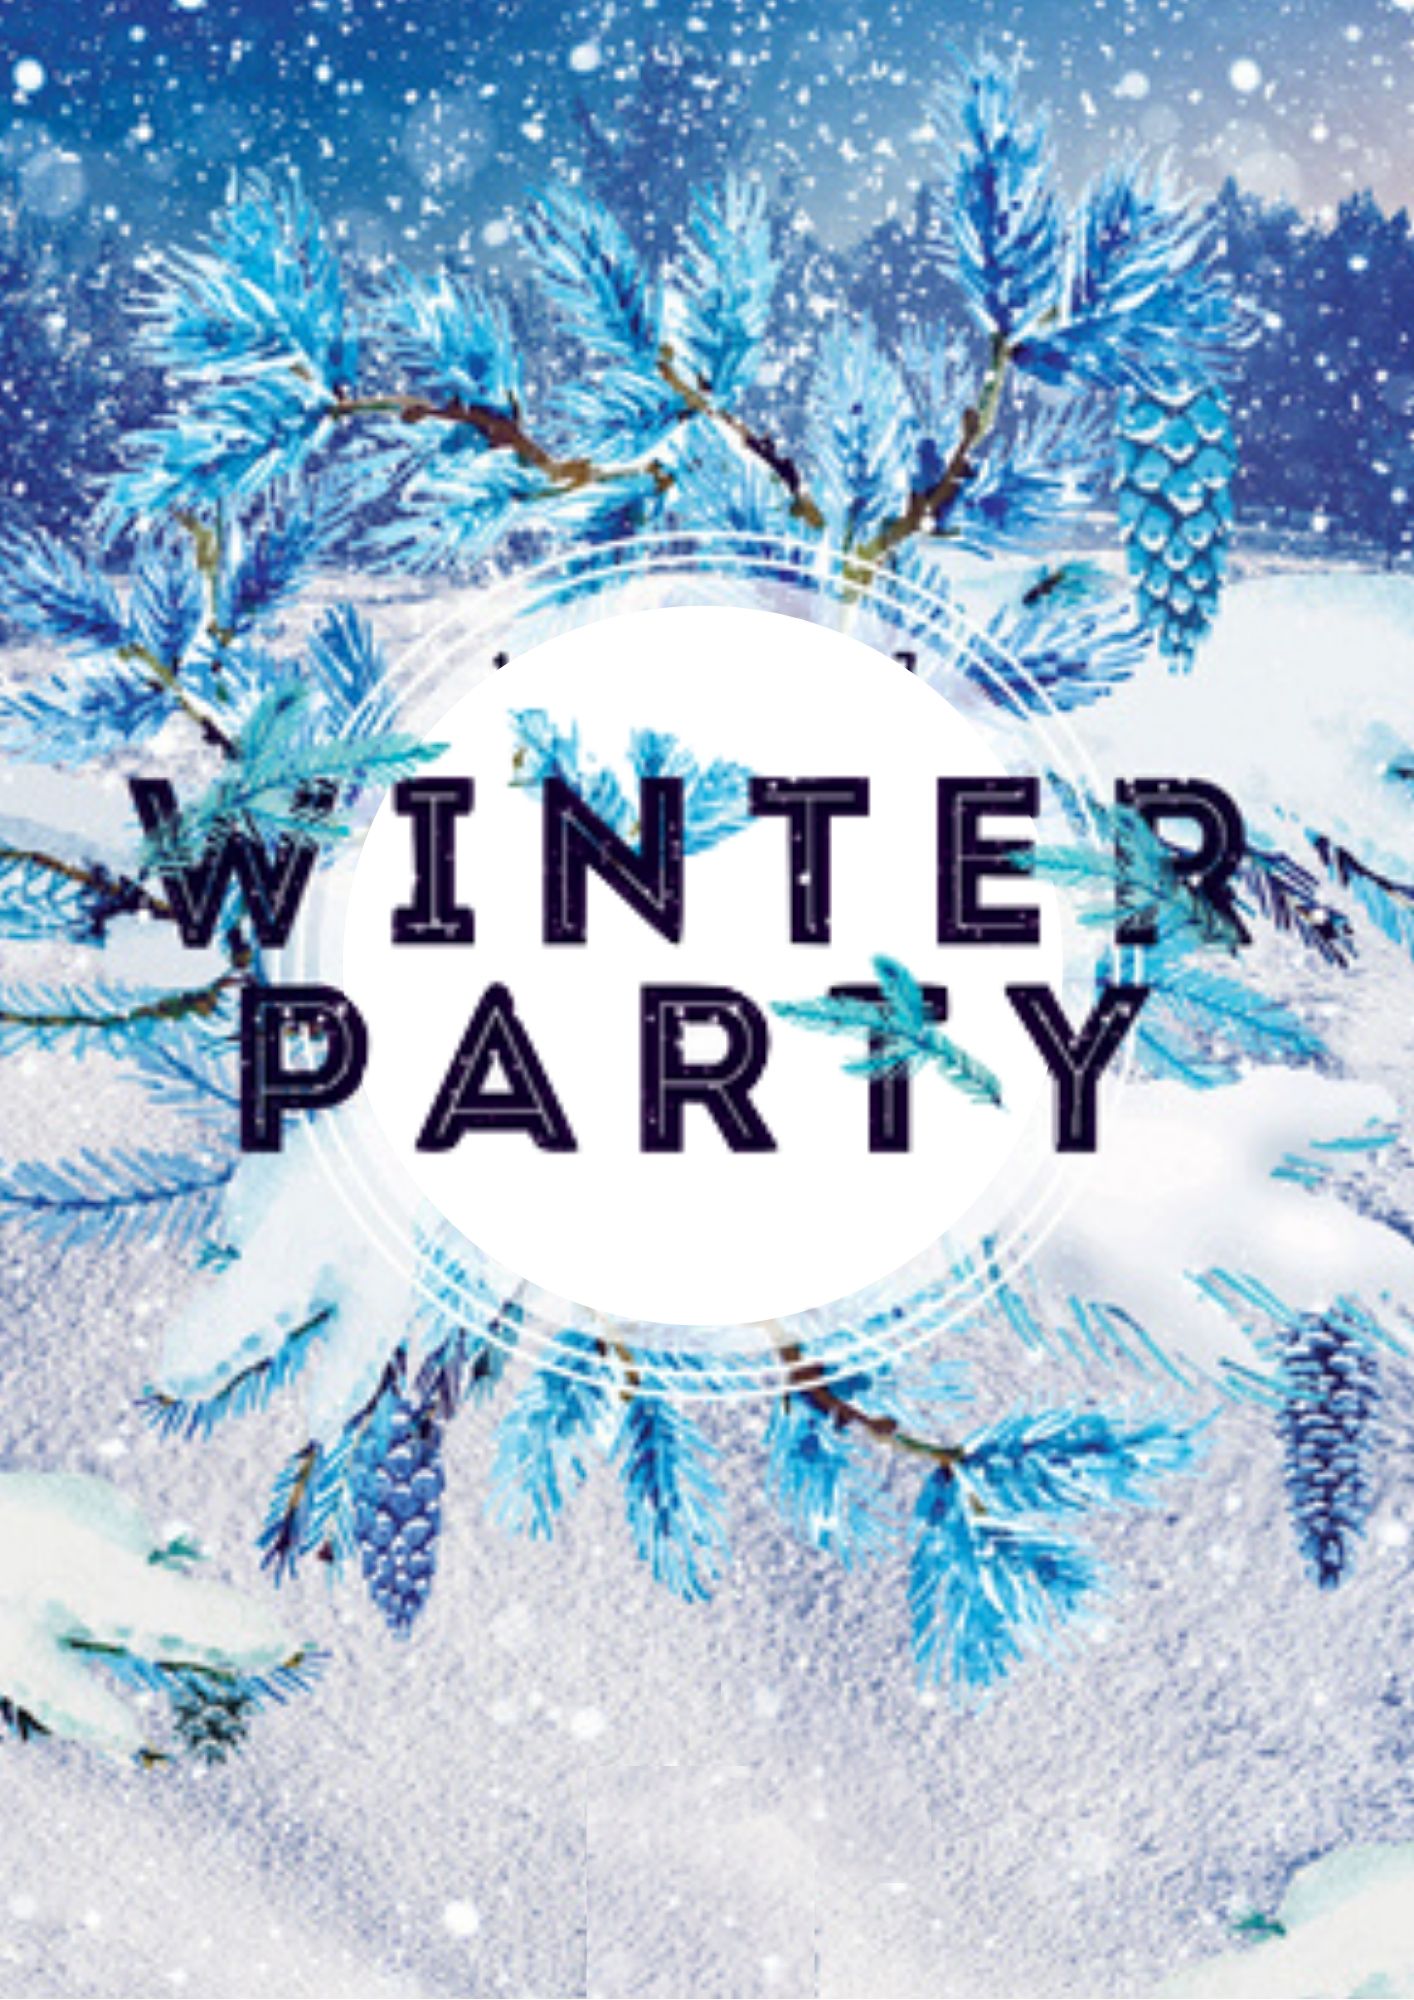 Winter party